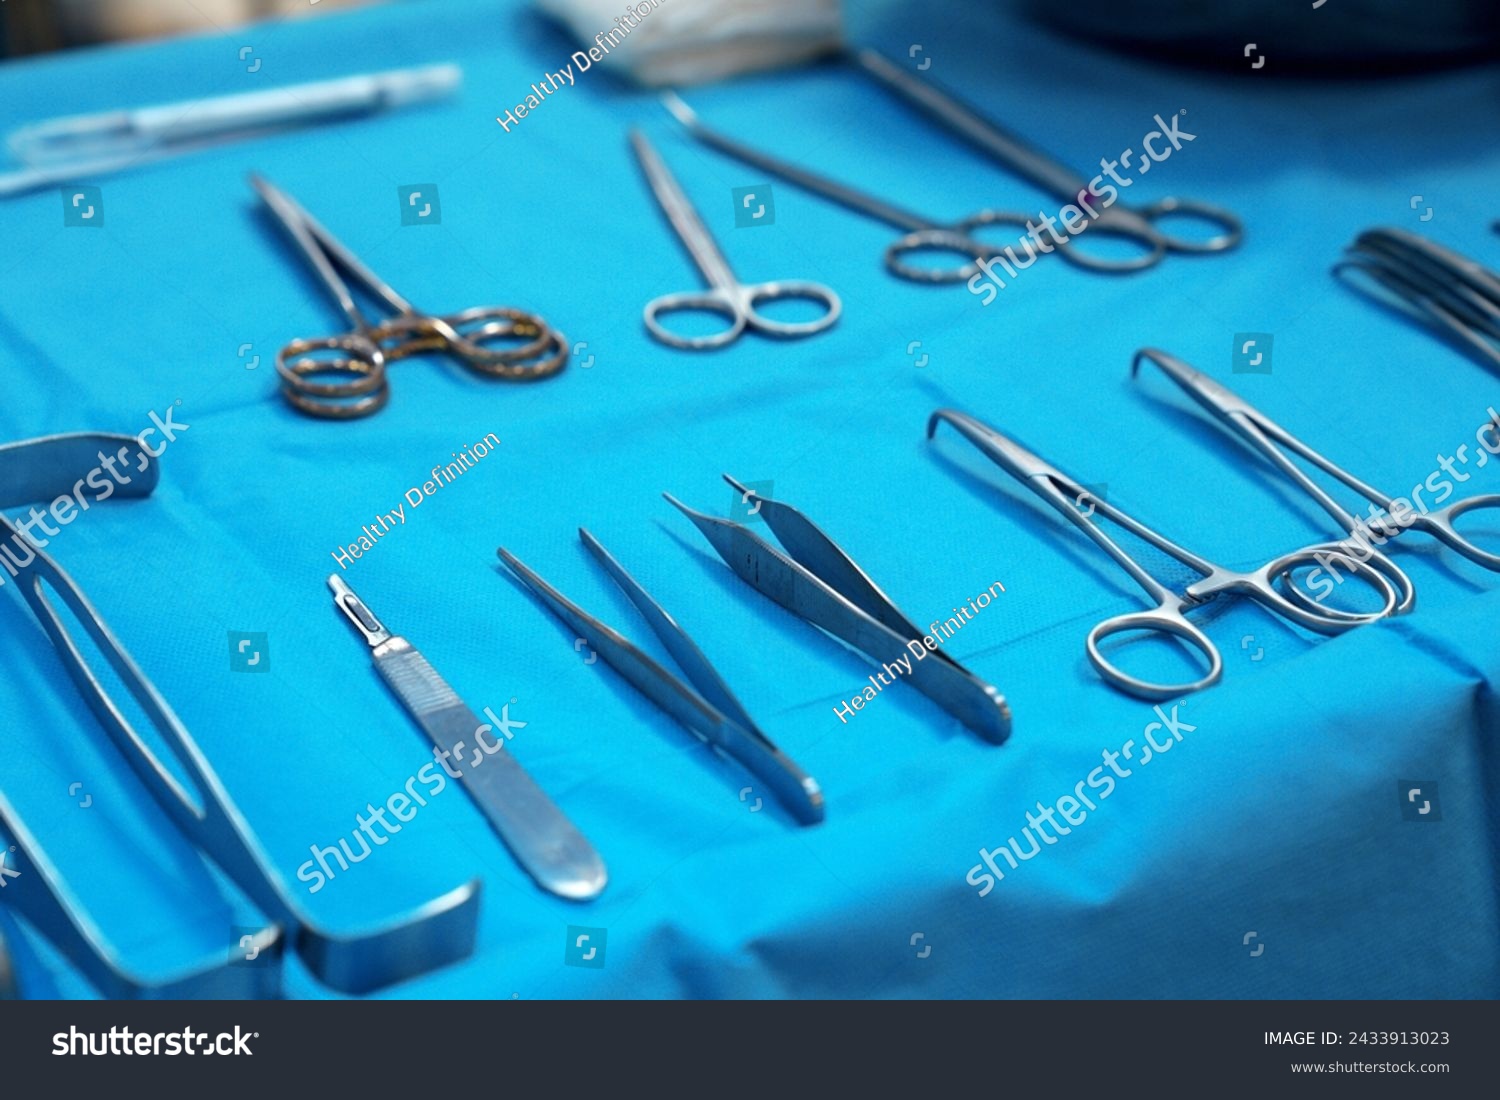 Sterile surgical instruments and tools including scalpels, scissors, forceps and tweezers arranged on a table for a surgery, Sterilized surgical instruments on the blue wrap	 #2433913023